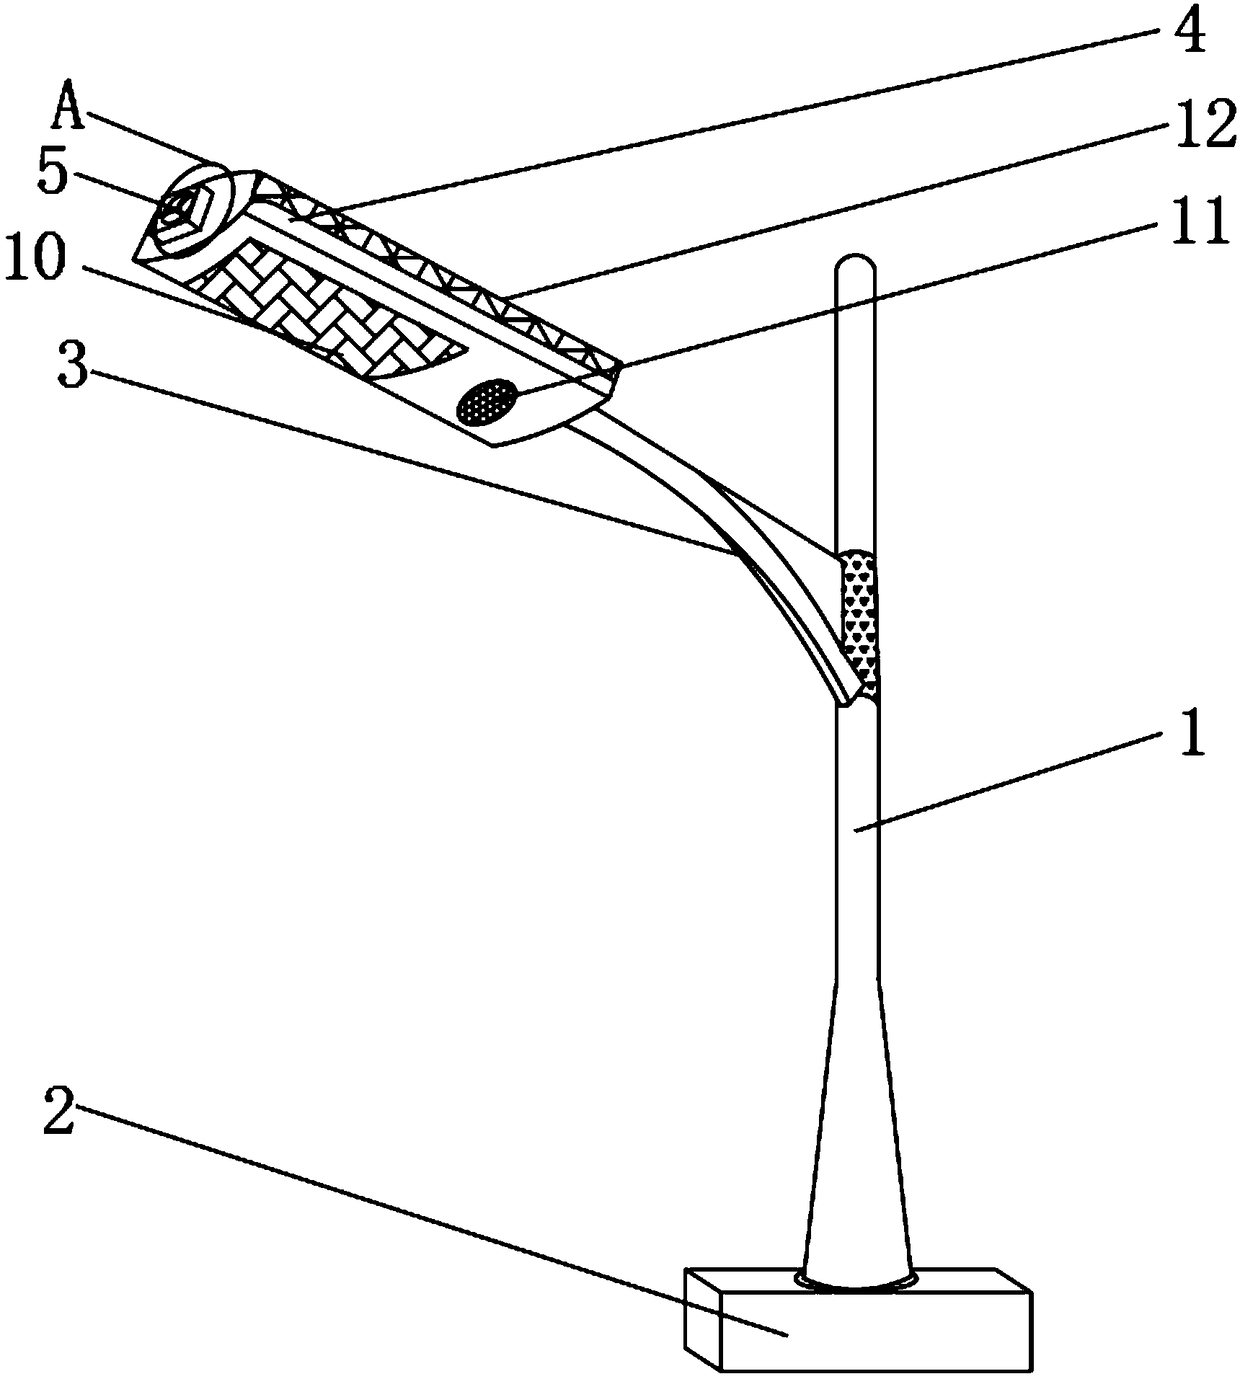 LED street lamp based on high-brightness coaxial light source